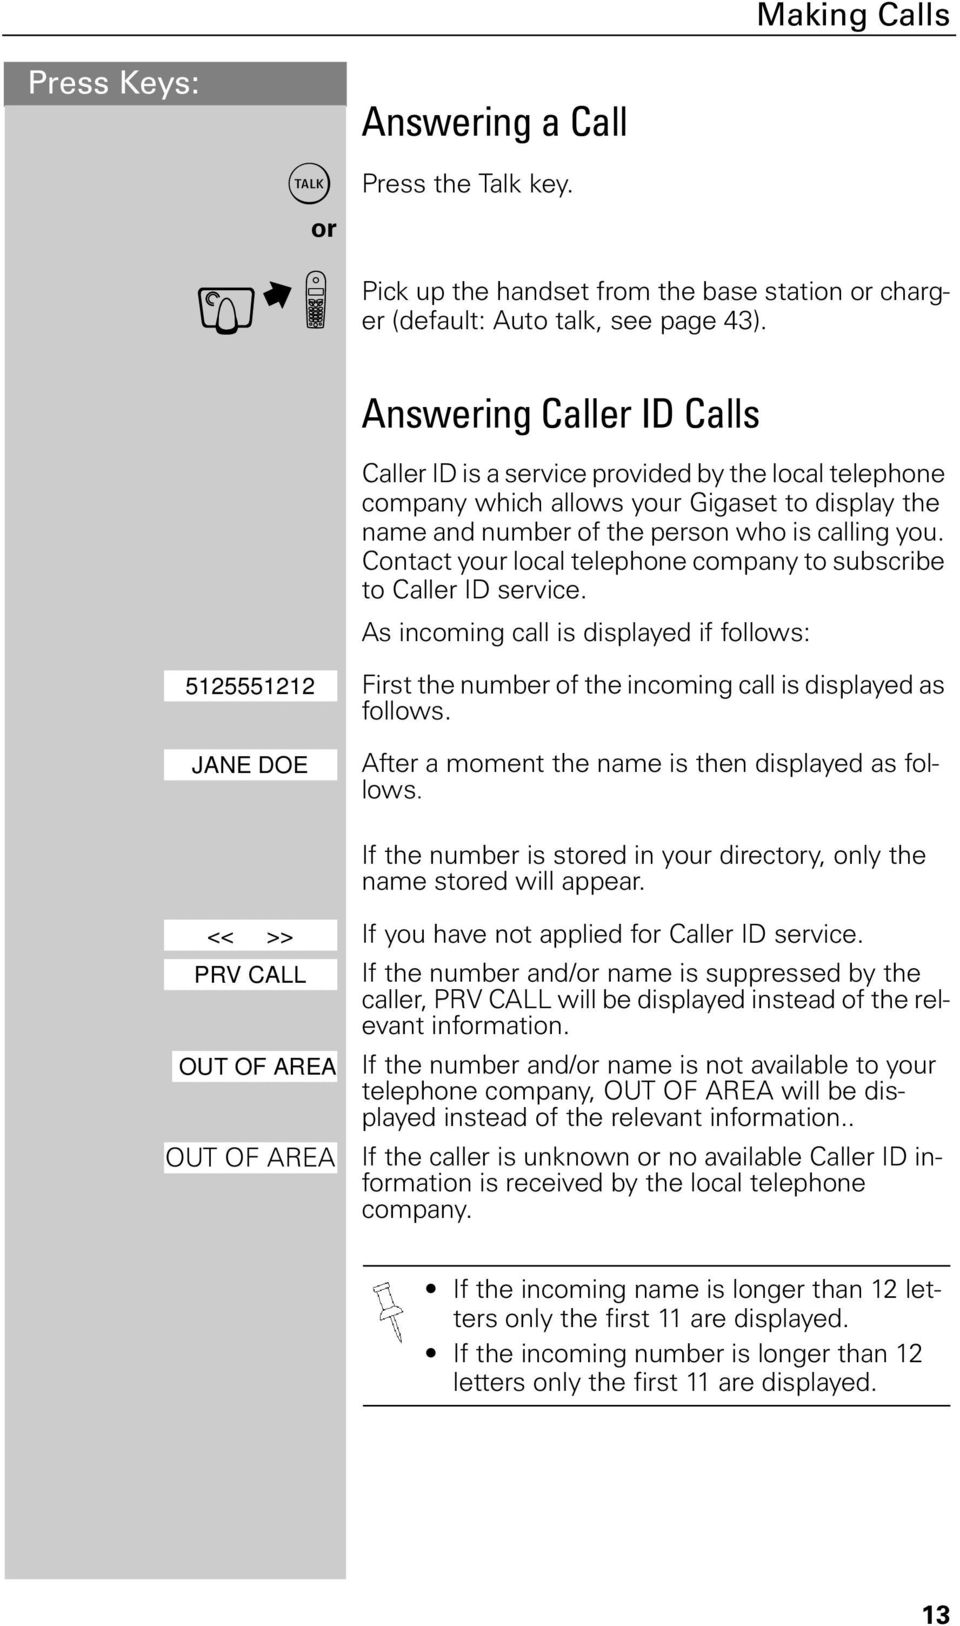 Contact your local telephone company to subscribe to Caller ID service. As incoming call is displayed if follows: 5125551212 First the number of the incoming call is displayed as follows.